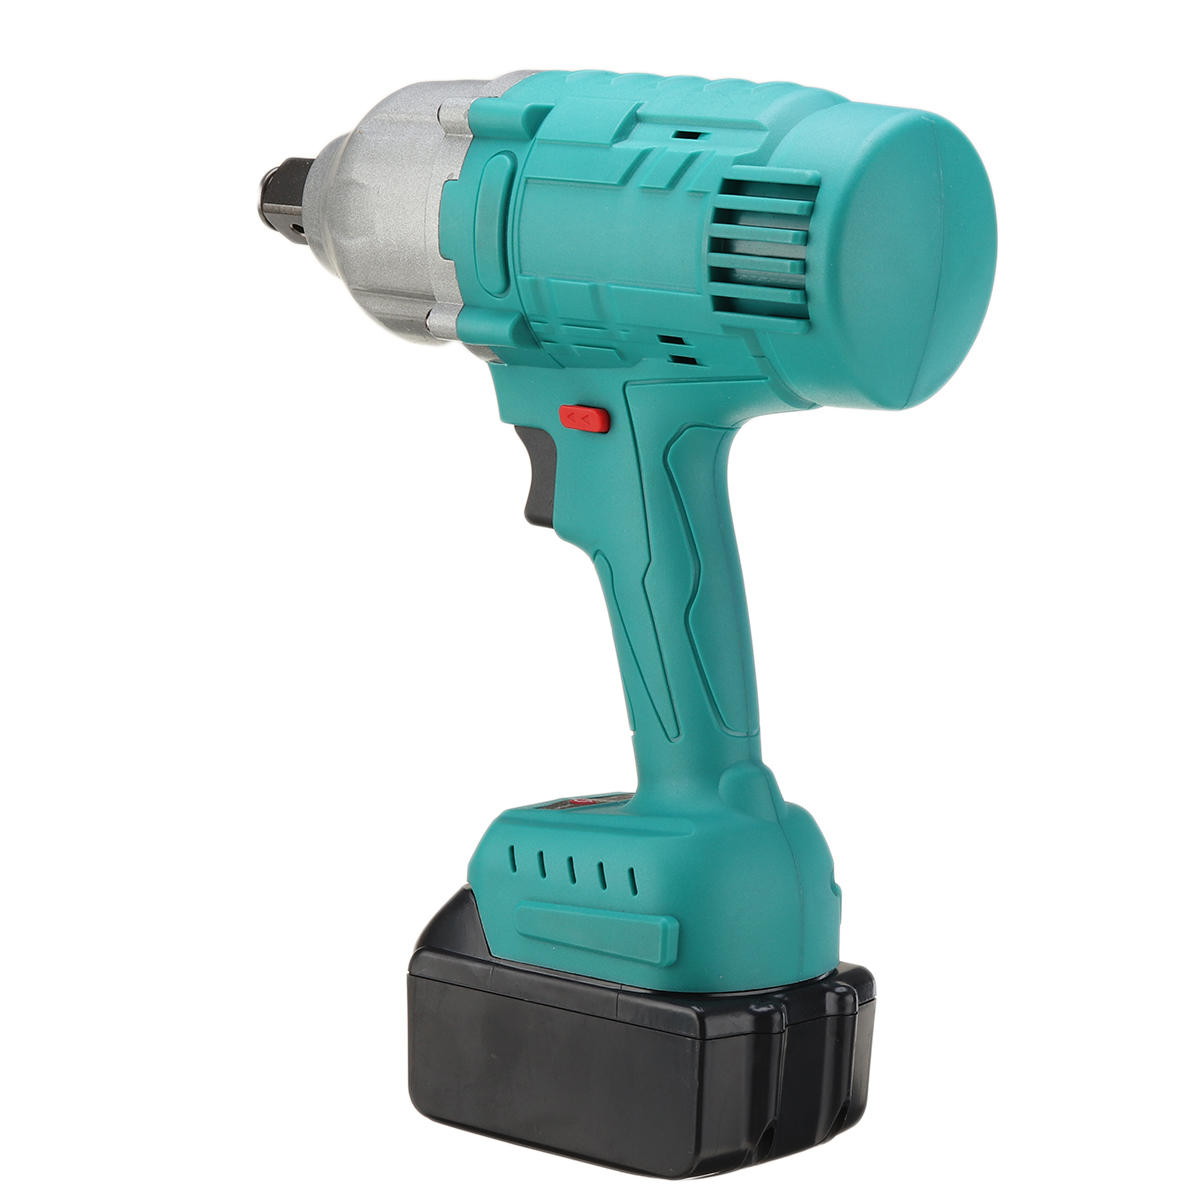 Find BLMIATKO 388V 3/4 /1/2 Electric Brushless Impact Wrench LED Working Light Rechargeable Woodworking Maintenance Tool W/1pc/2pcs Battery for Makita for Sale on Gipsybee.com with cryptocurrencies